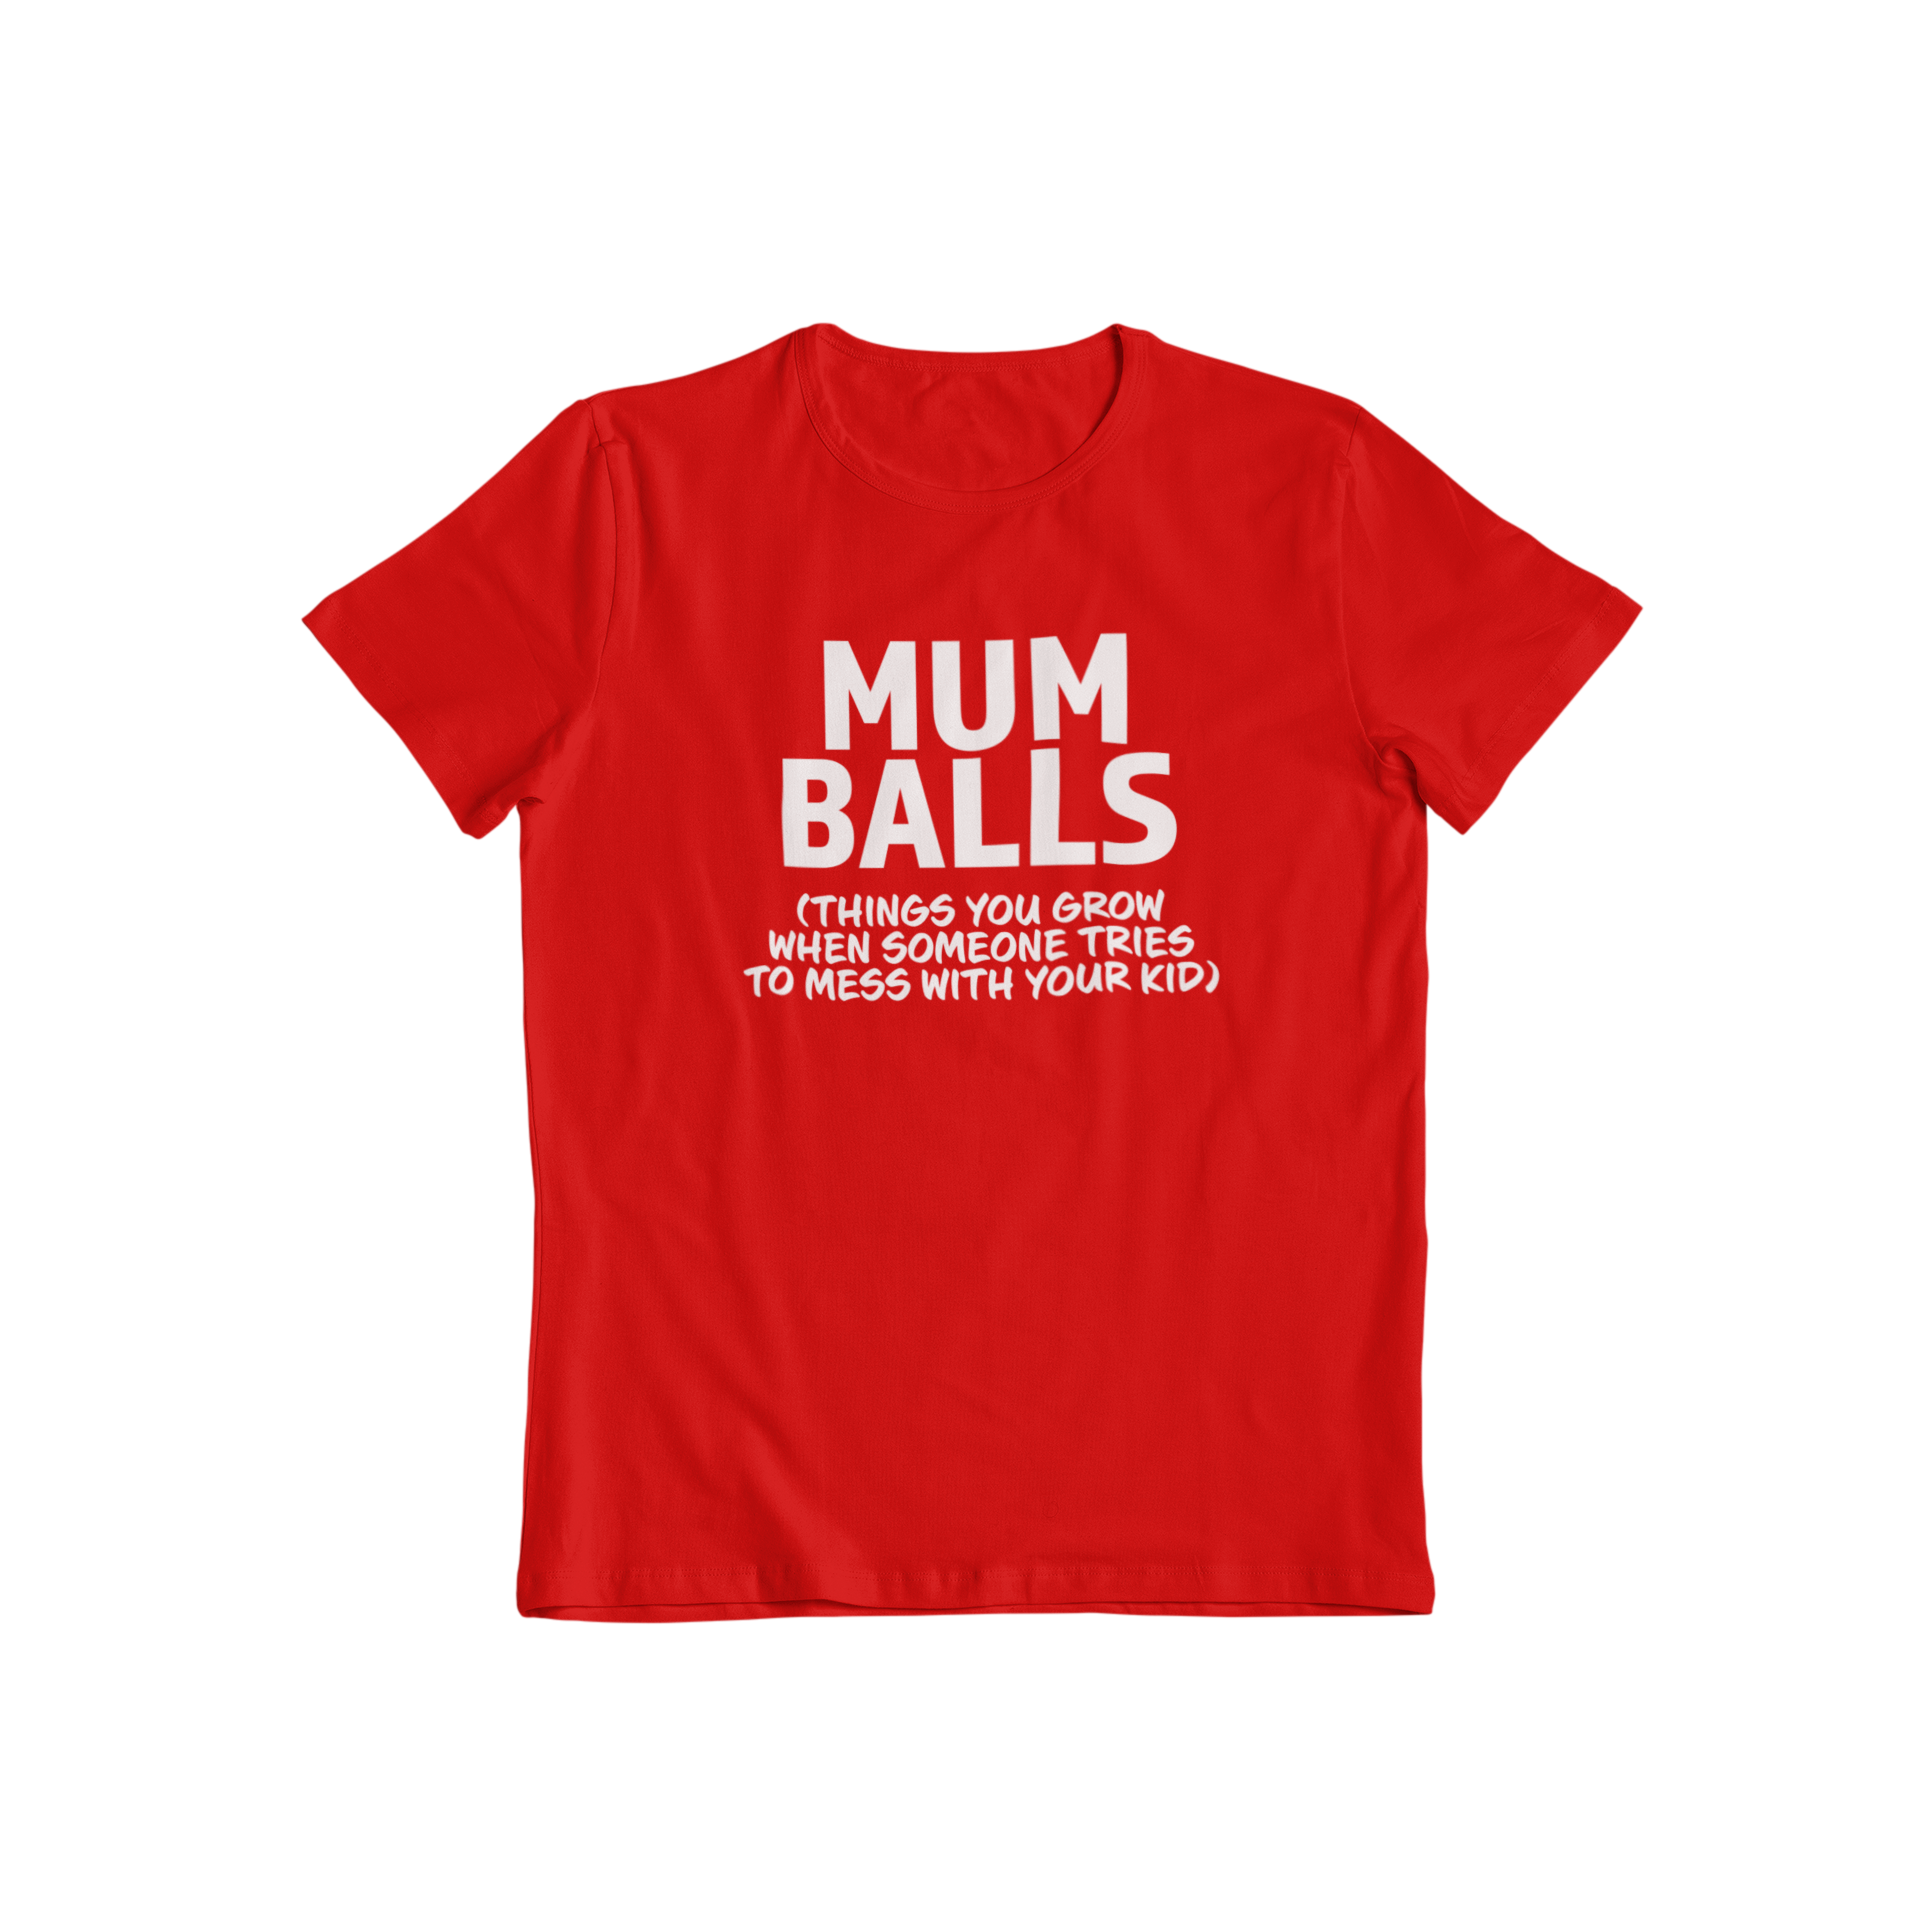 Get ready to show off your playful and quirky side with our Mumballs T-shirt! This classic slogan tee will have everyone laughing with its humorous reference to a mother's fierce protection of her kids. Perfect for any mom who doesn't take herself too seriously. (Limited stock, order now!)